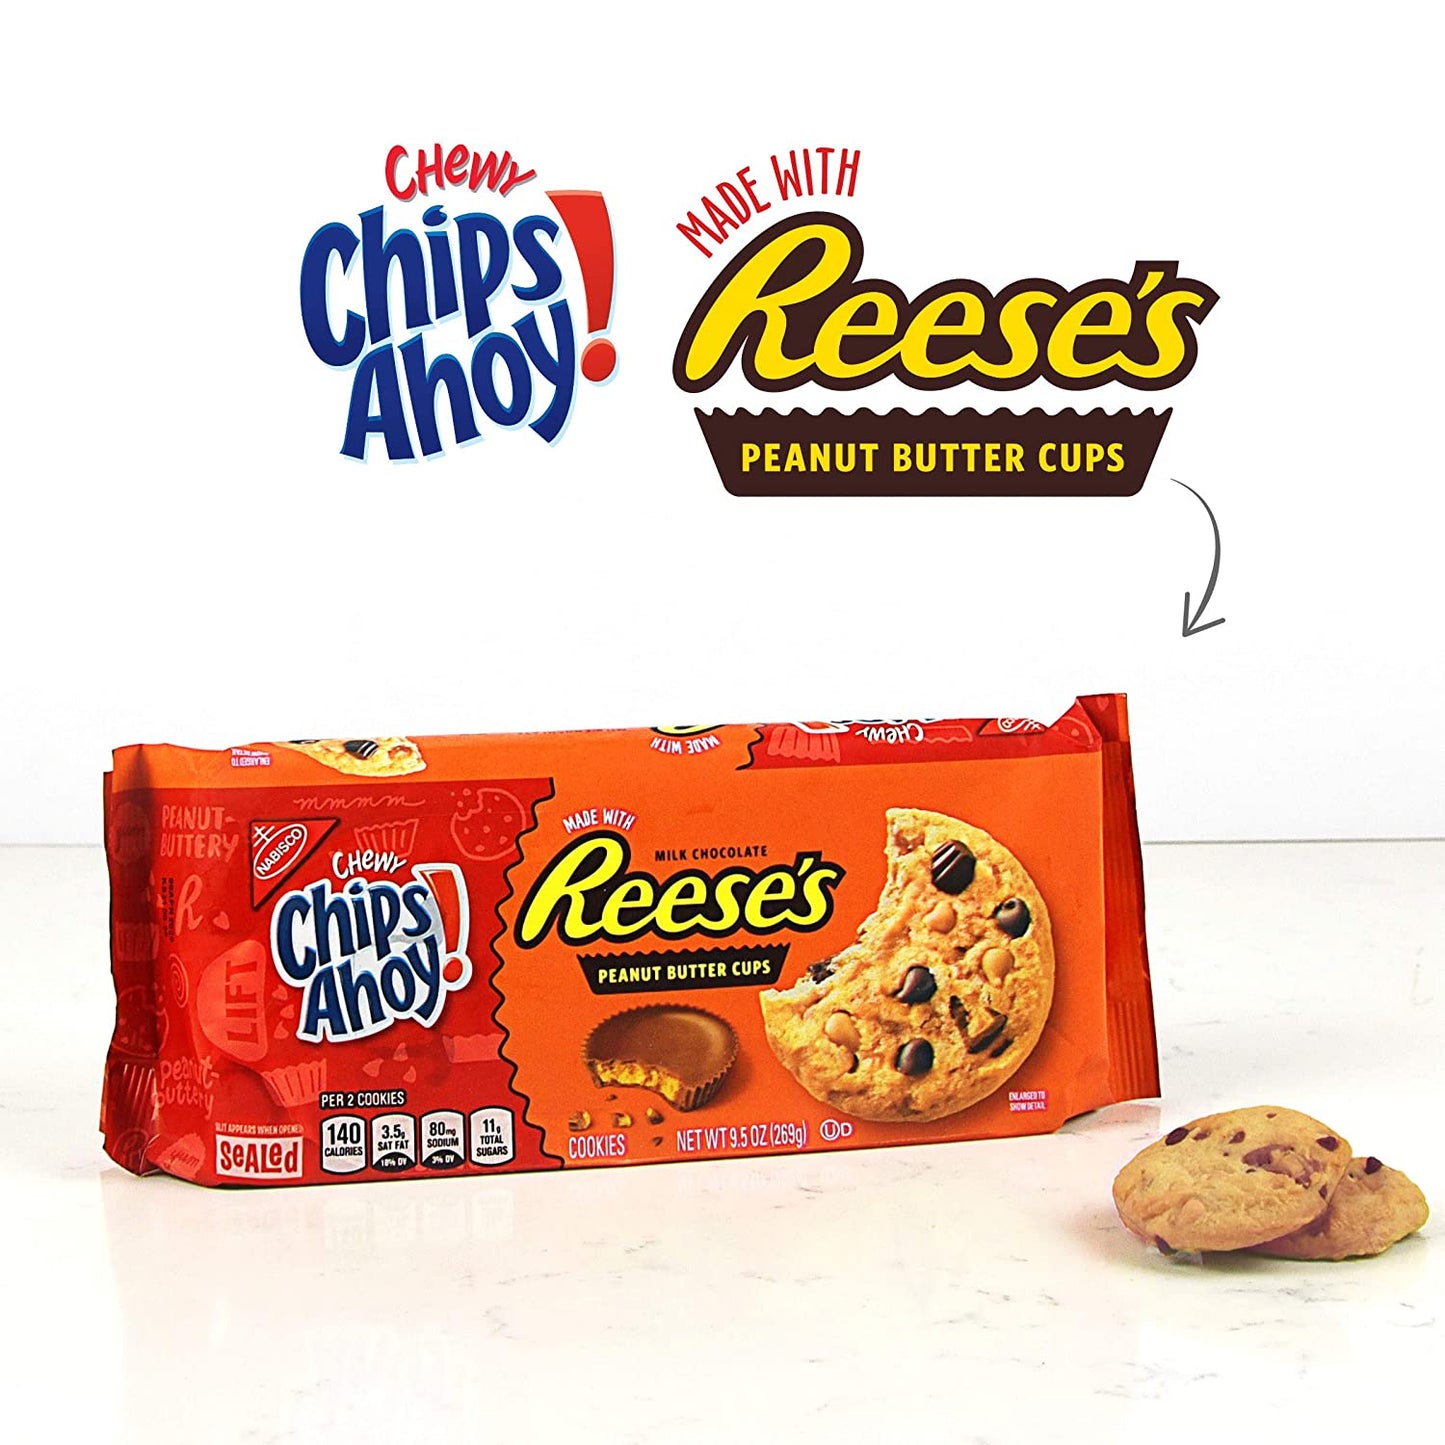 CHIPS AHOY! Chewy Chocolate Chip Cookies with Reese's Peanut Butter Cups